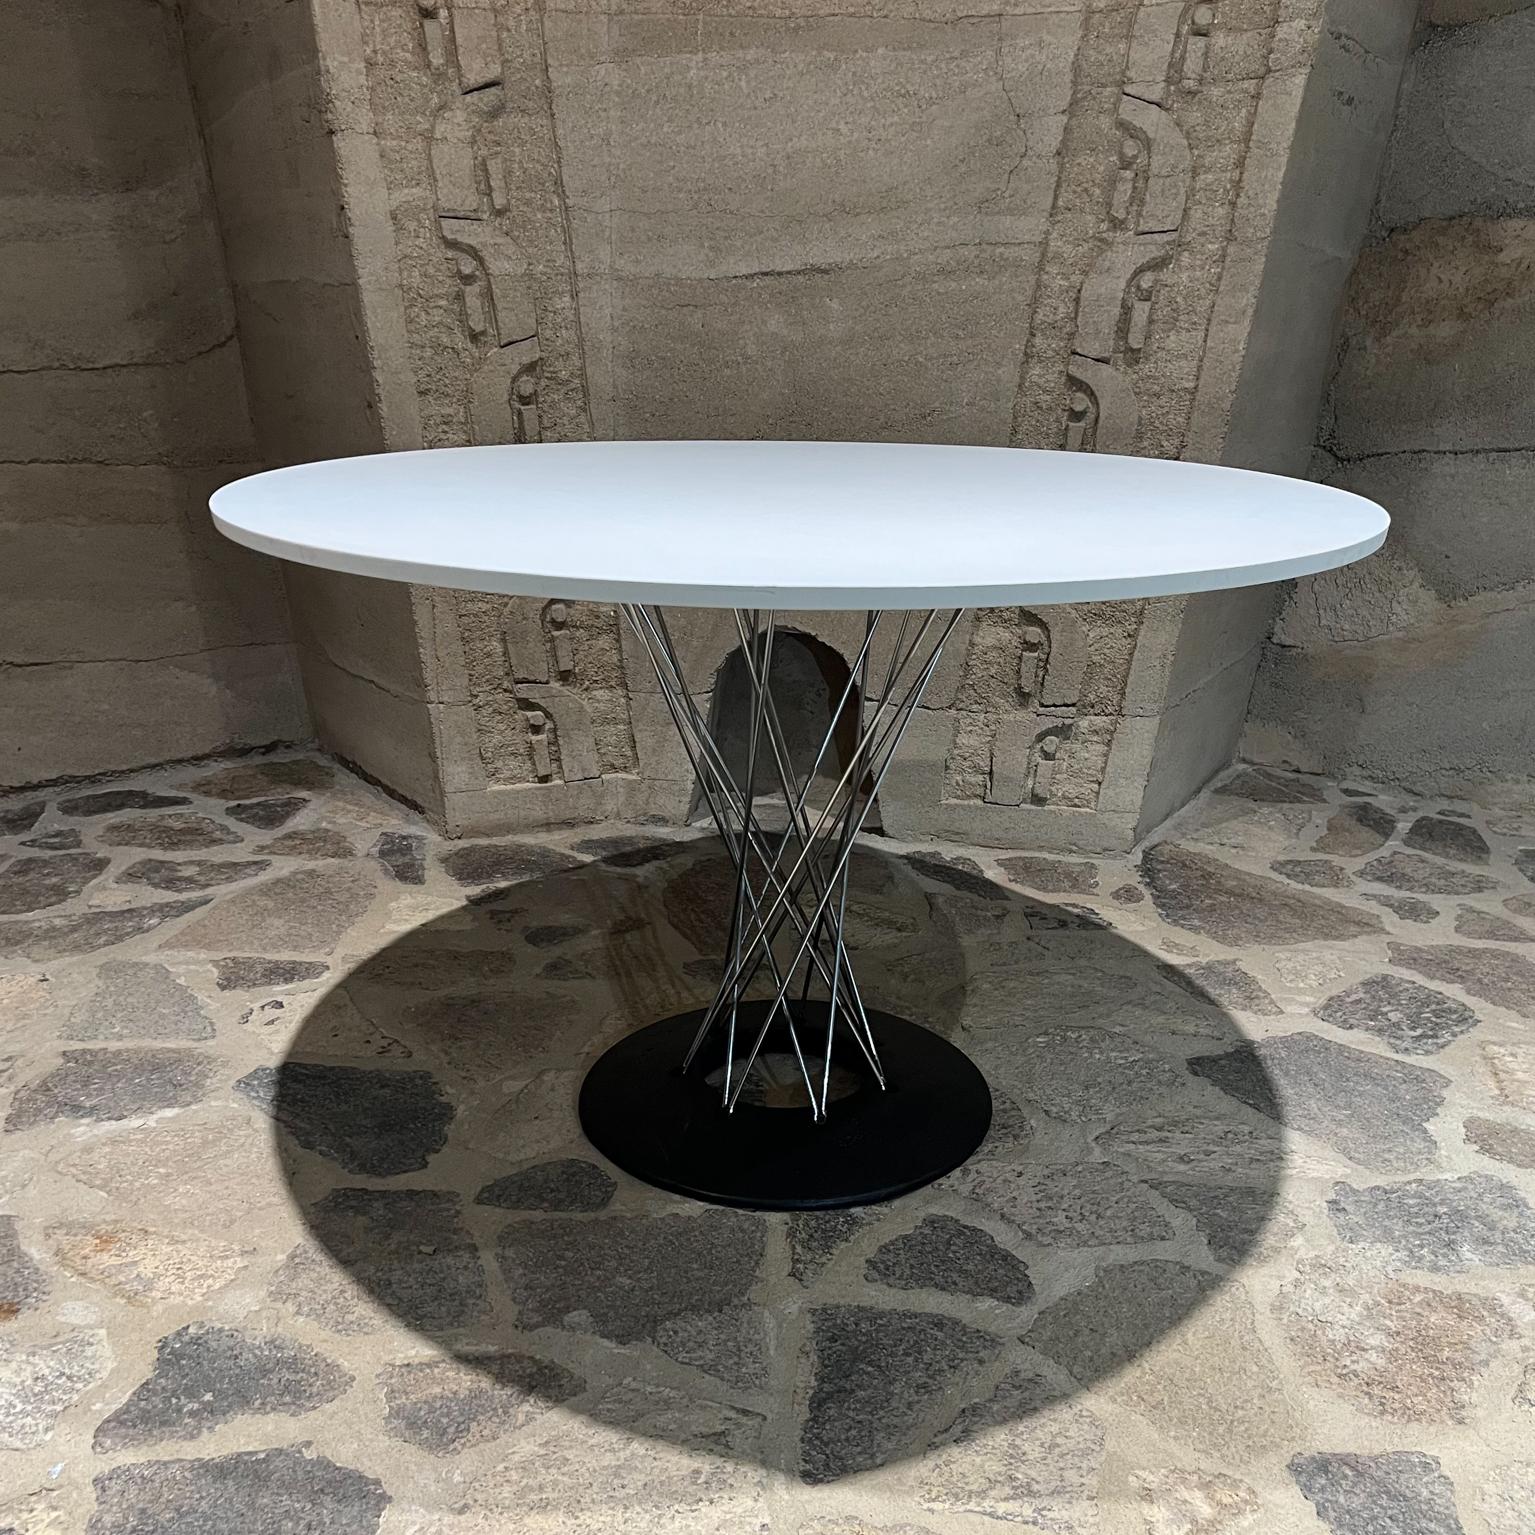 1957 Original Cyclone Dining Table designed by noted artist Isamu Noguchi for Knoll.
Signs of stamp ghost label underside present and worn.
features a new formica top.
Made in the circa 1950s.
Chrome Formica Iron and Steel
29.5 tall x 48